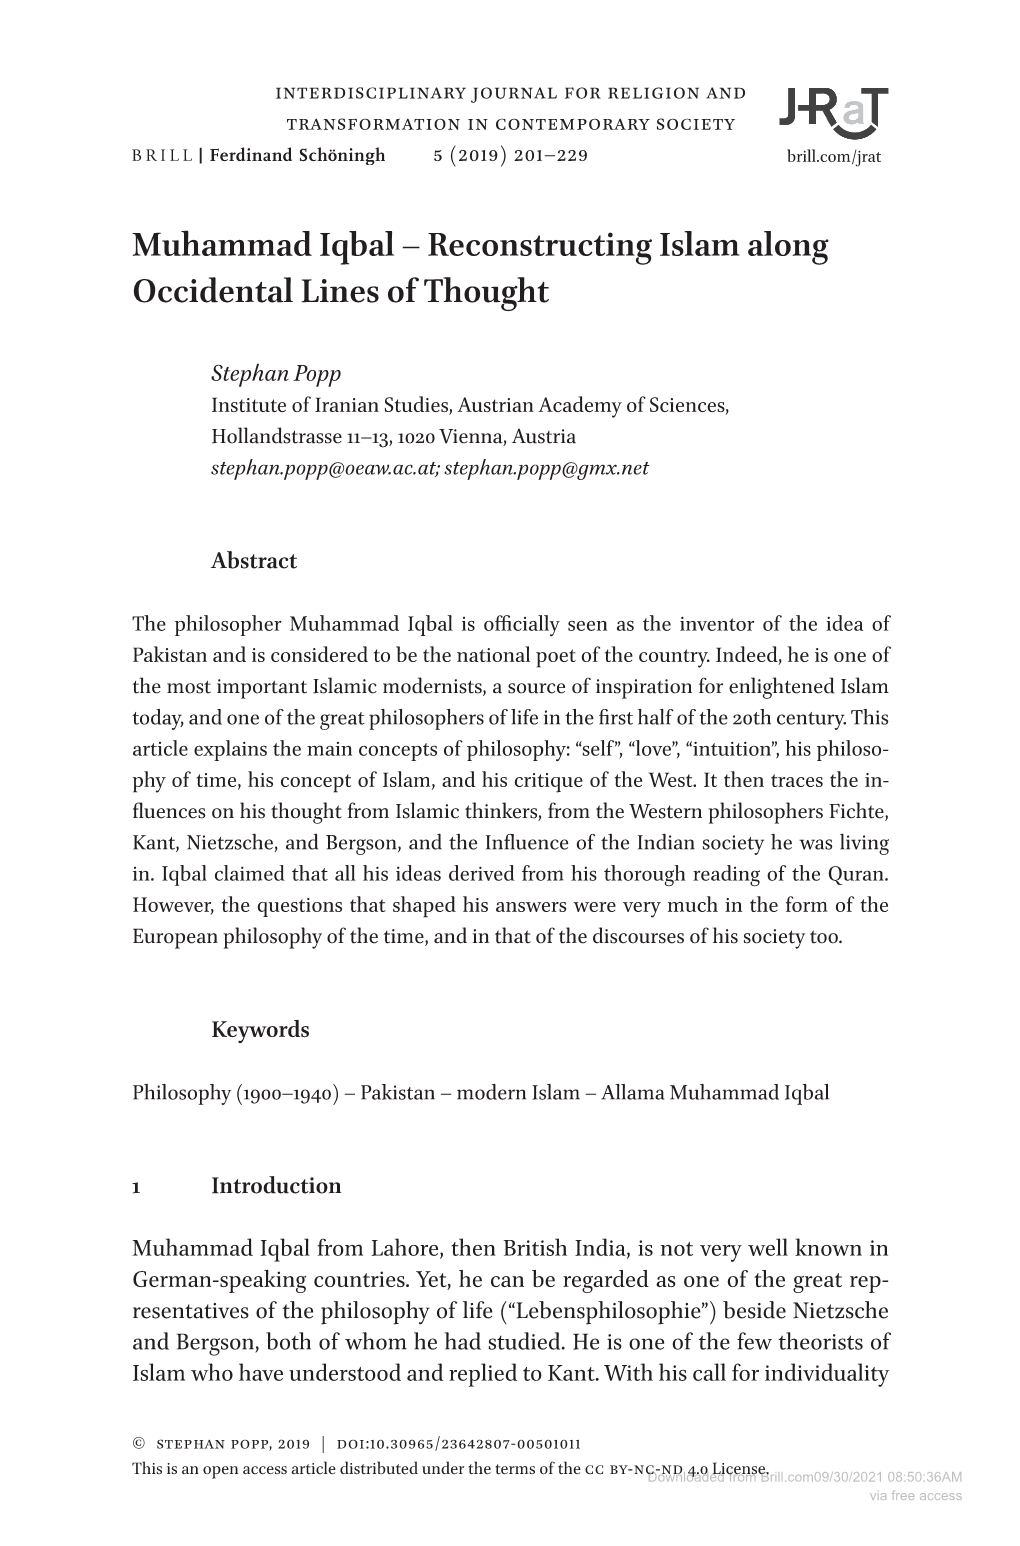 Muhammad Iqbal – Reconstructing Islam Along Occidental Lines of Thought